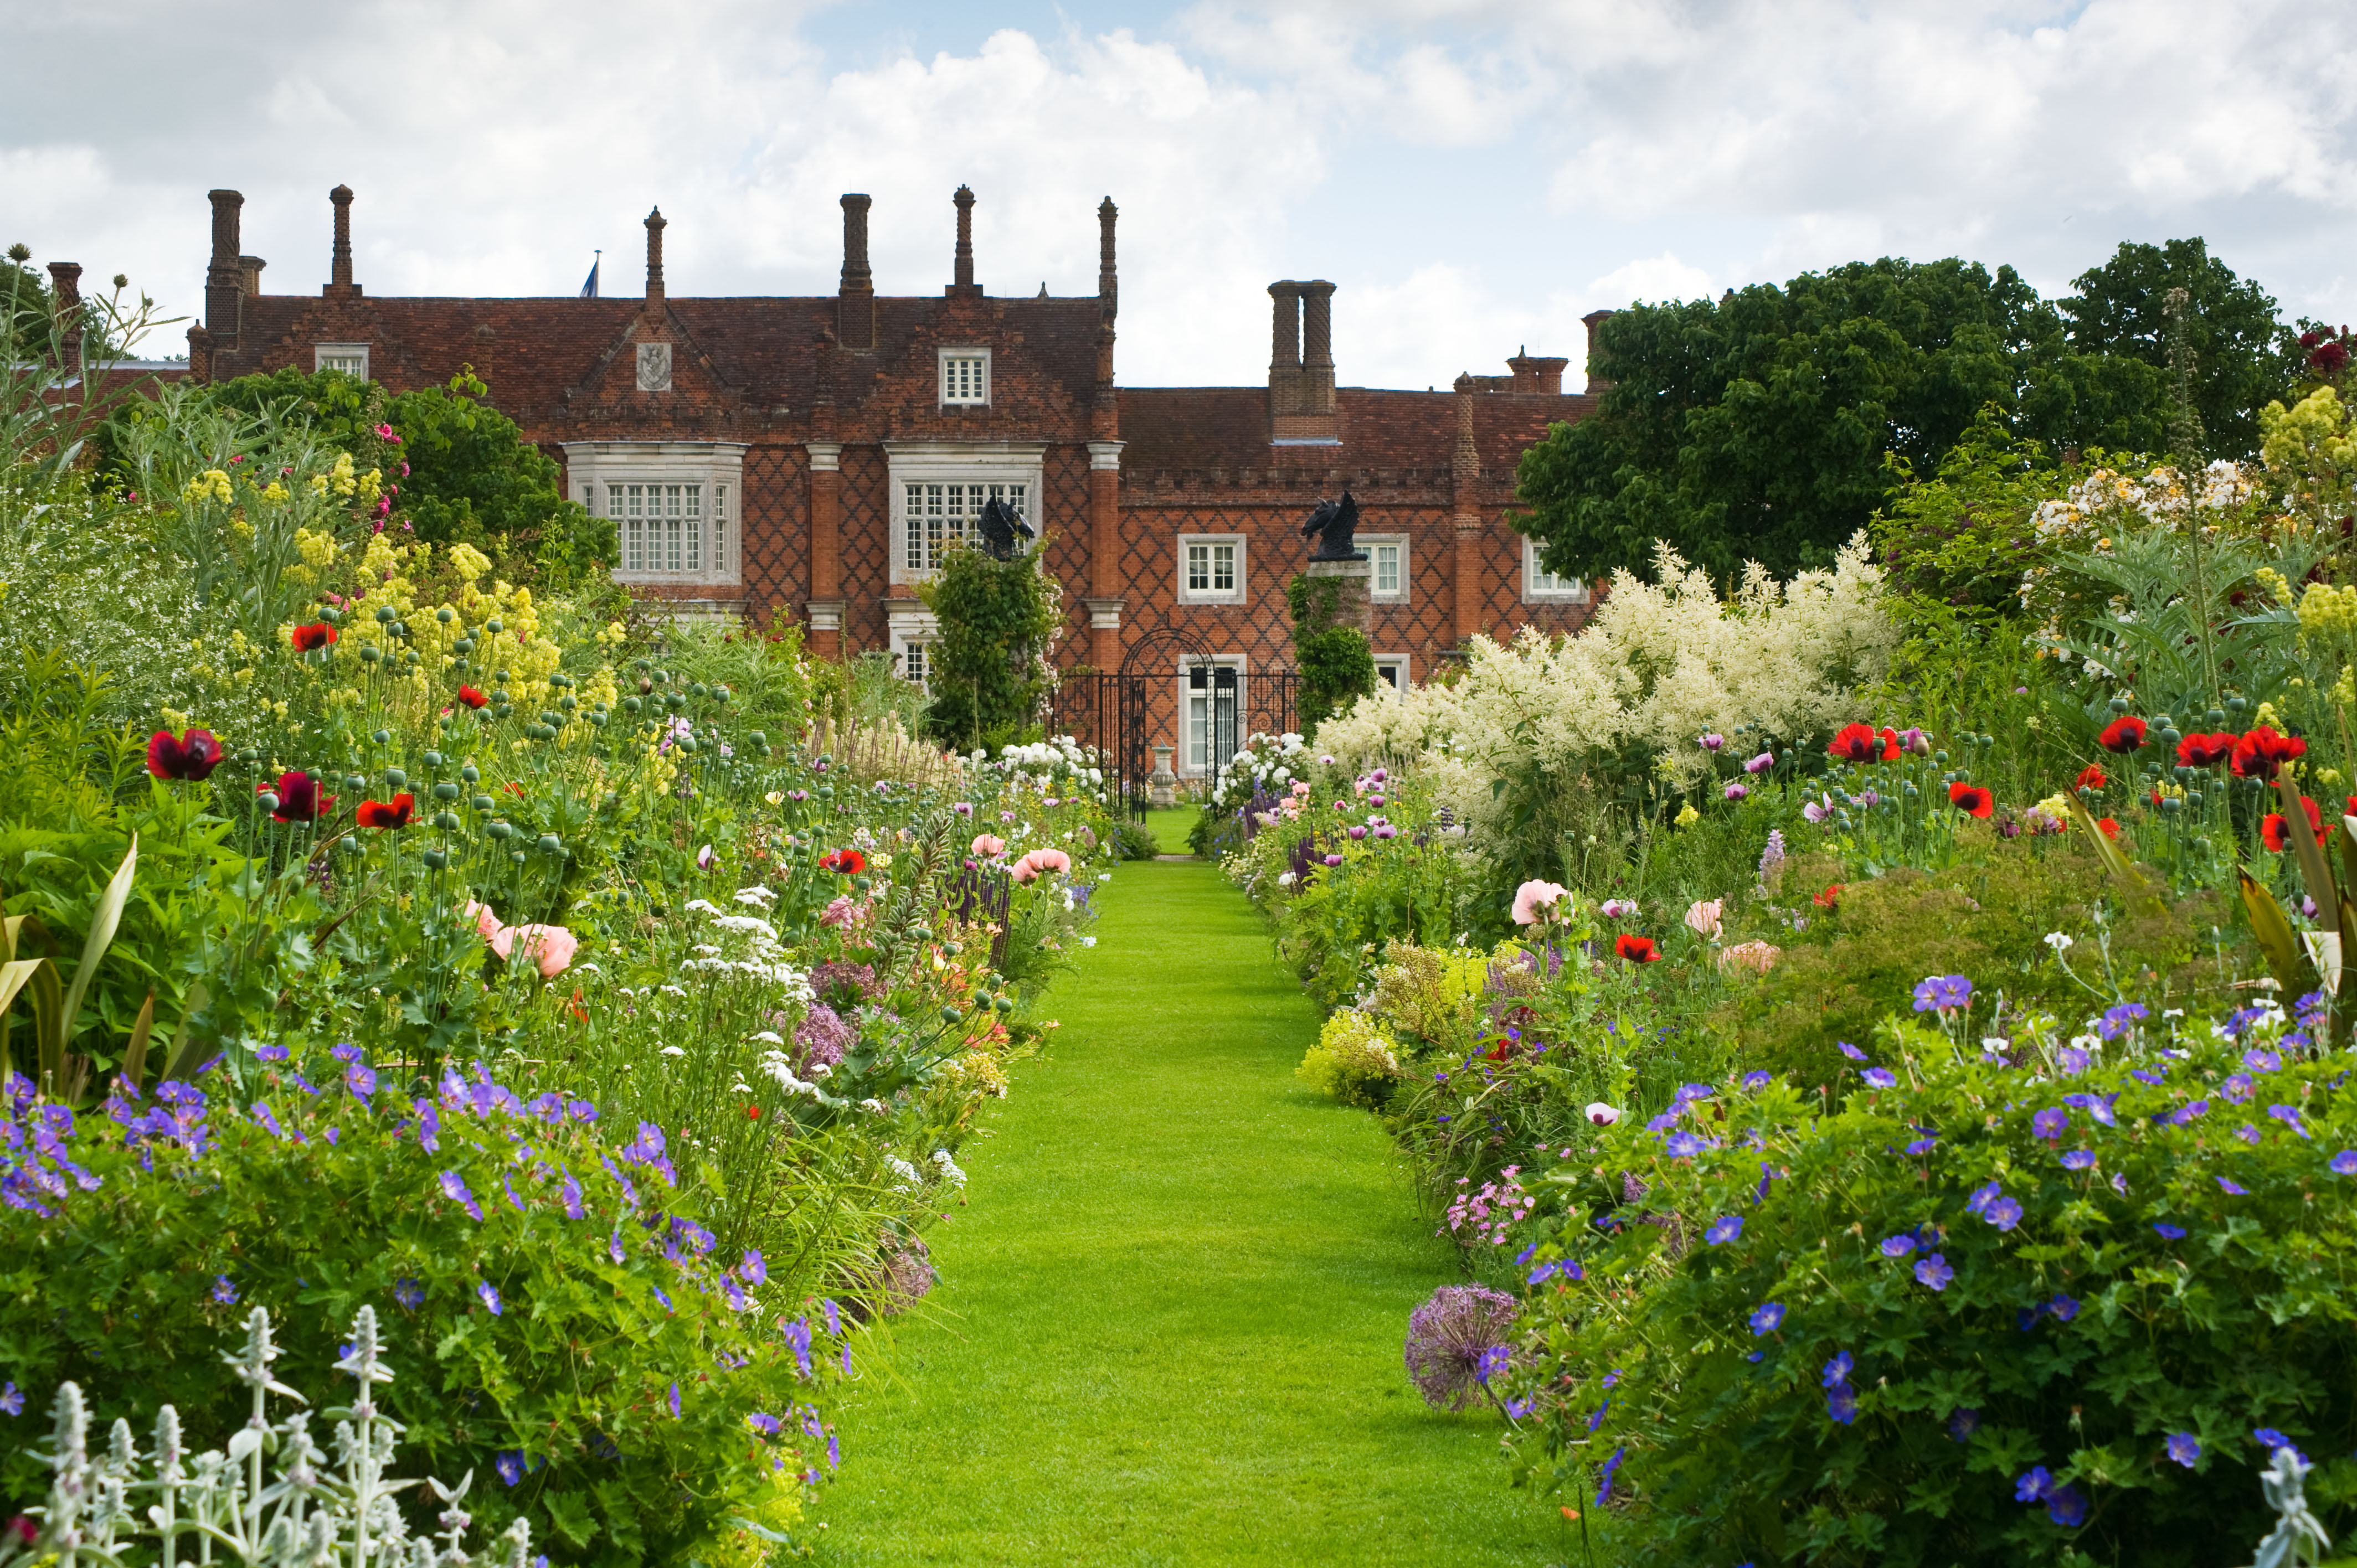 Image of Helmingham Hall and Gardens in Suffolk